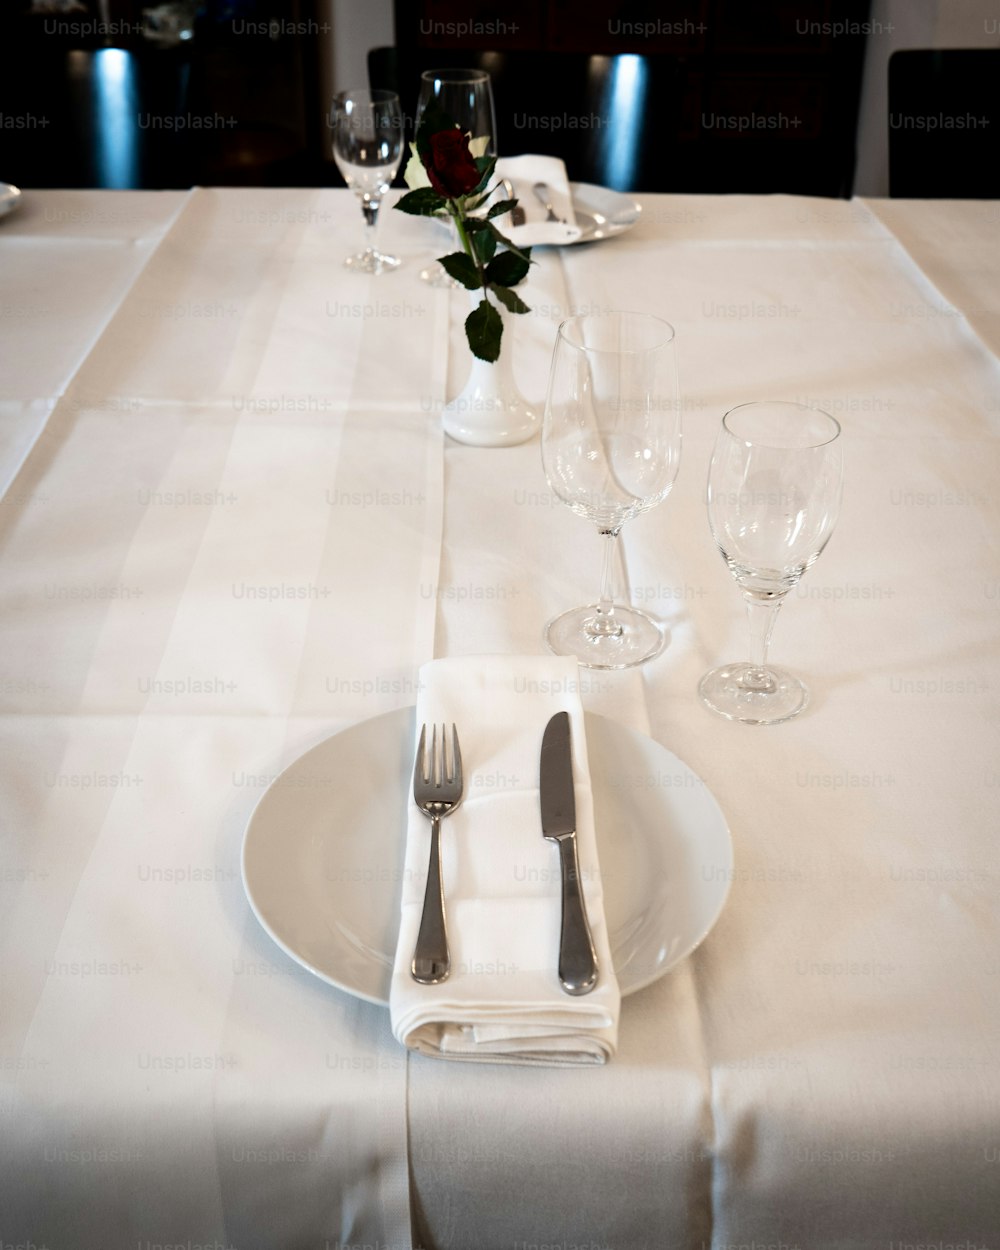 a table with a white table cloth and silverware